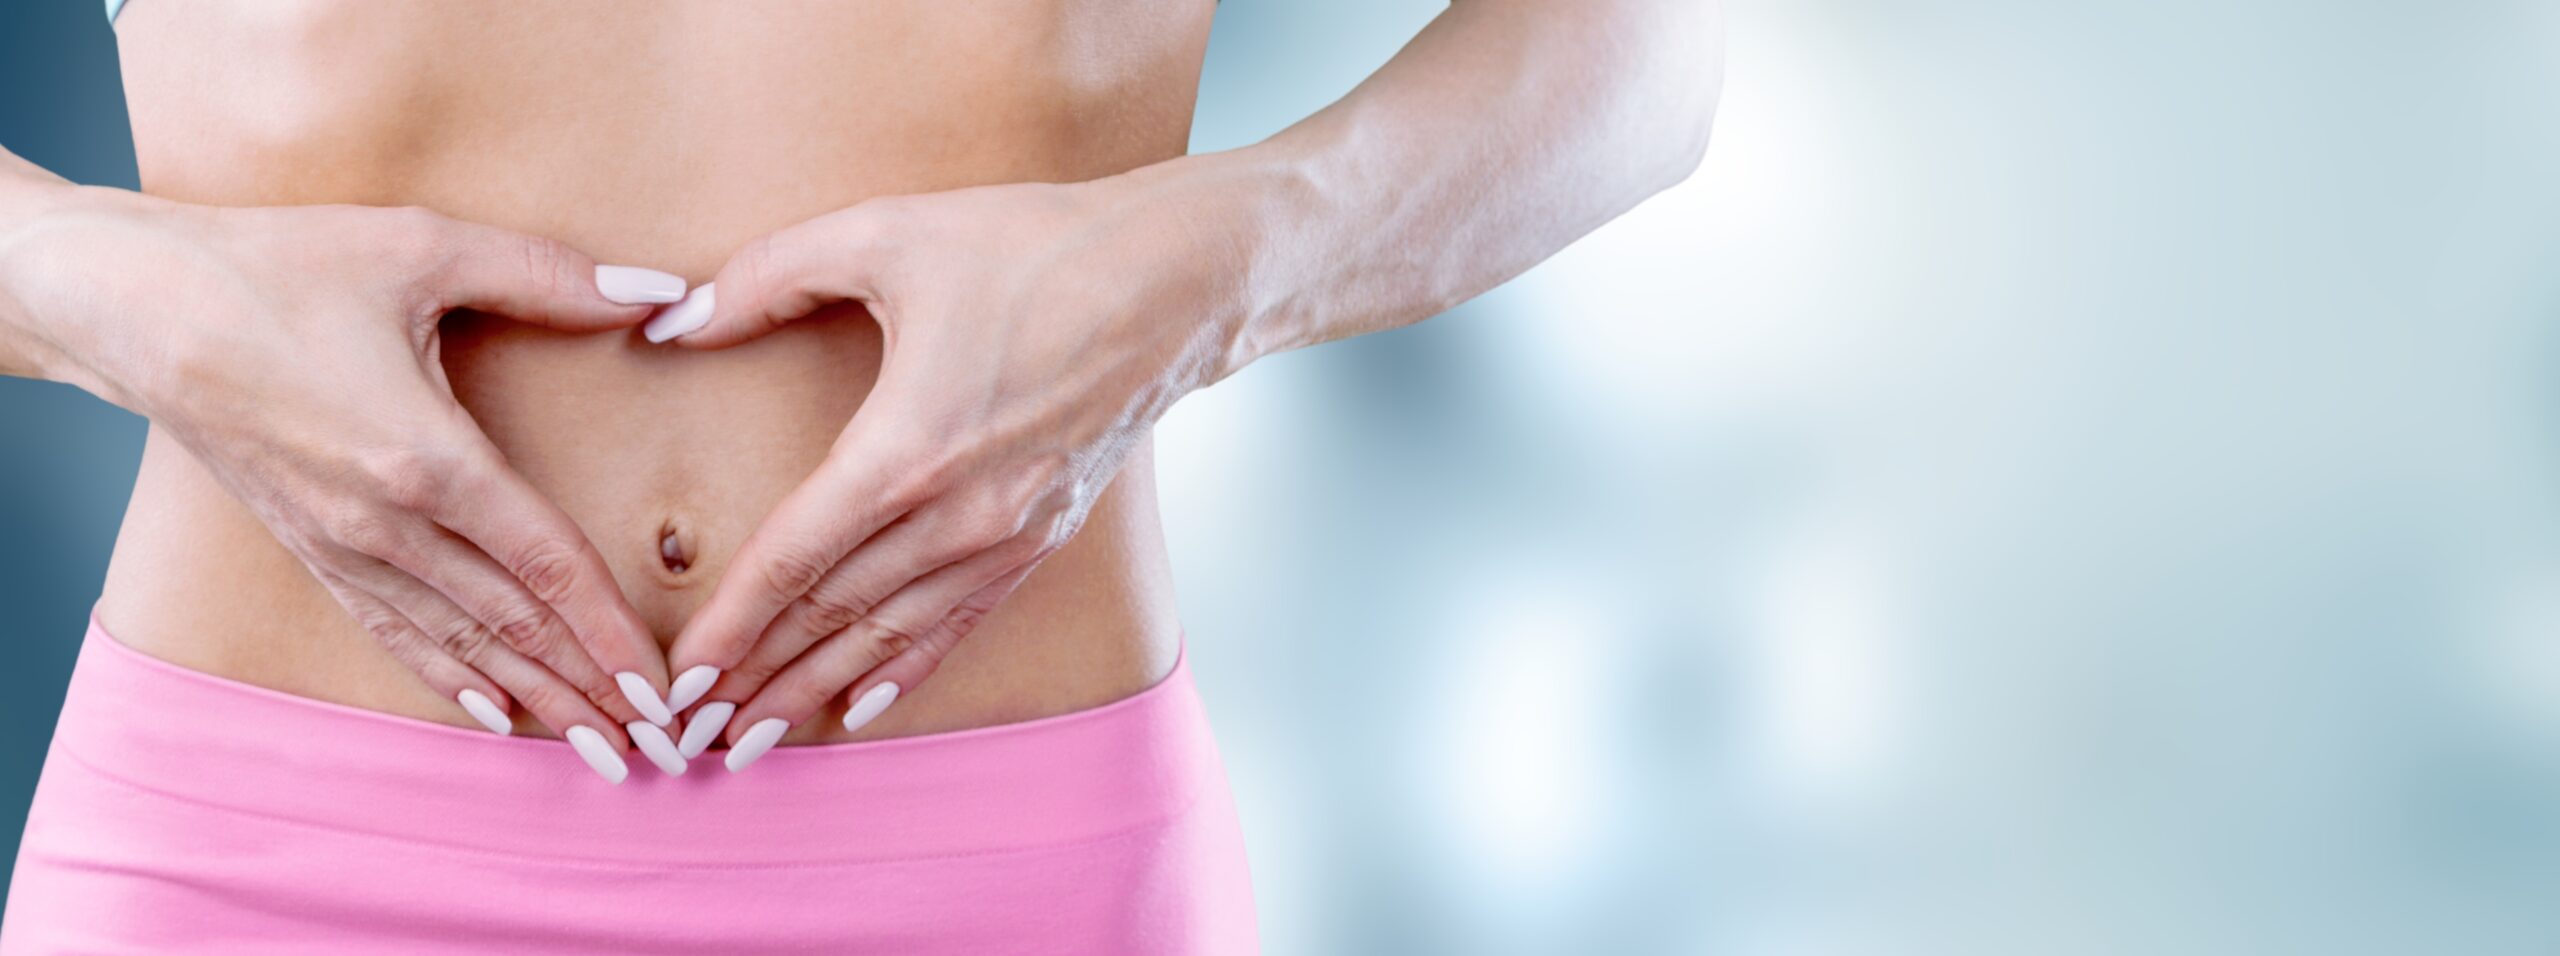 The Top 15 Bloating Culprits: Avoid These Foods to Feel Comfortable and Energized